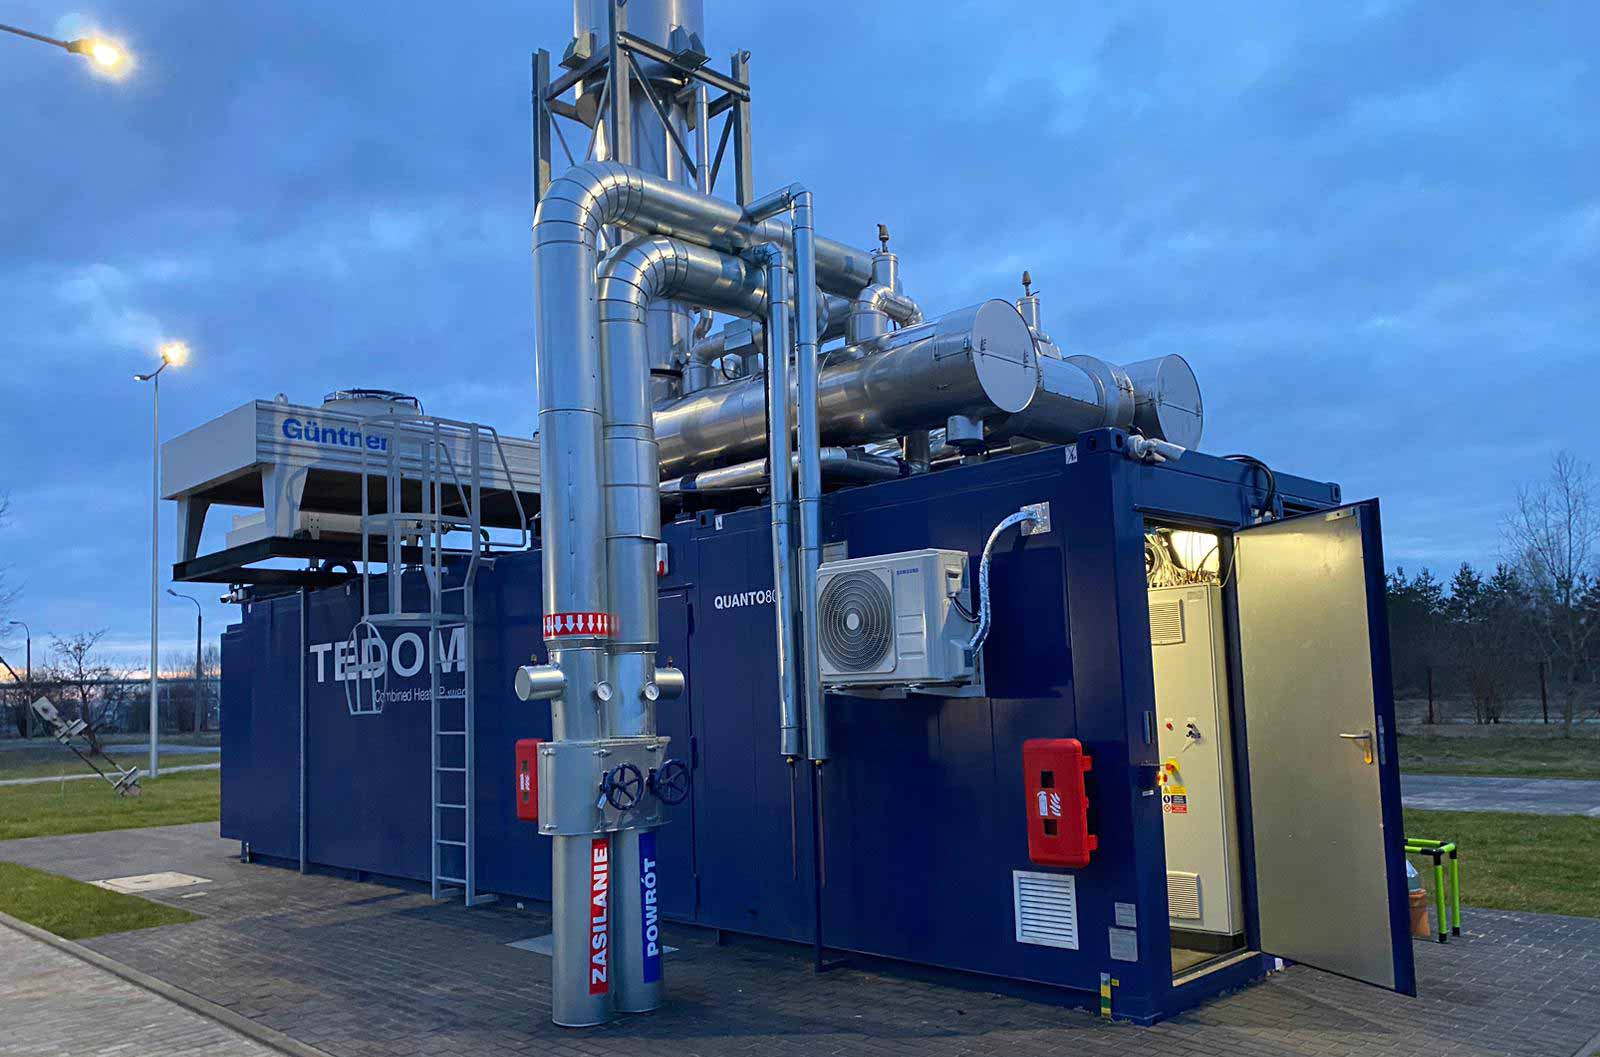 The new MWM TCG 3016 V16 gas engine, installed and delivered as a turnkey container solution by TEDOM a.s., uses cogeneration to generate electricity and heat for the public grid.